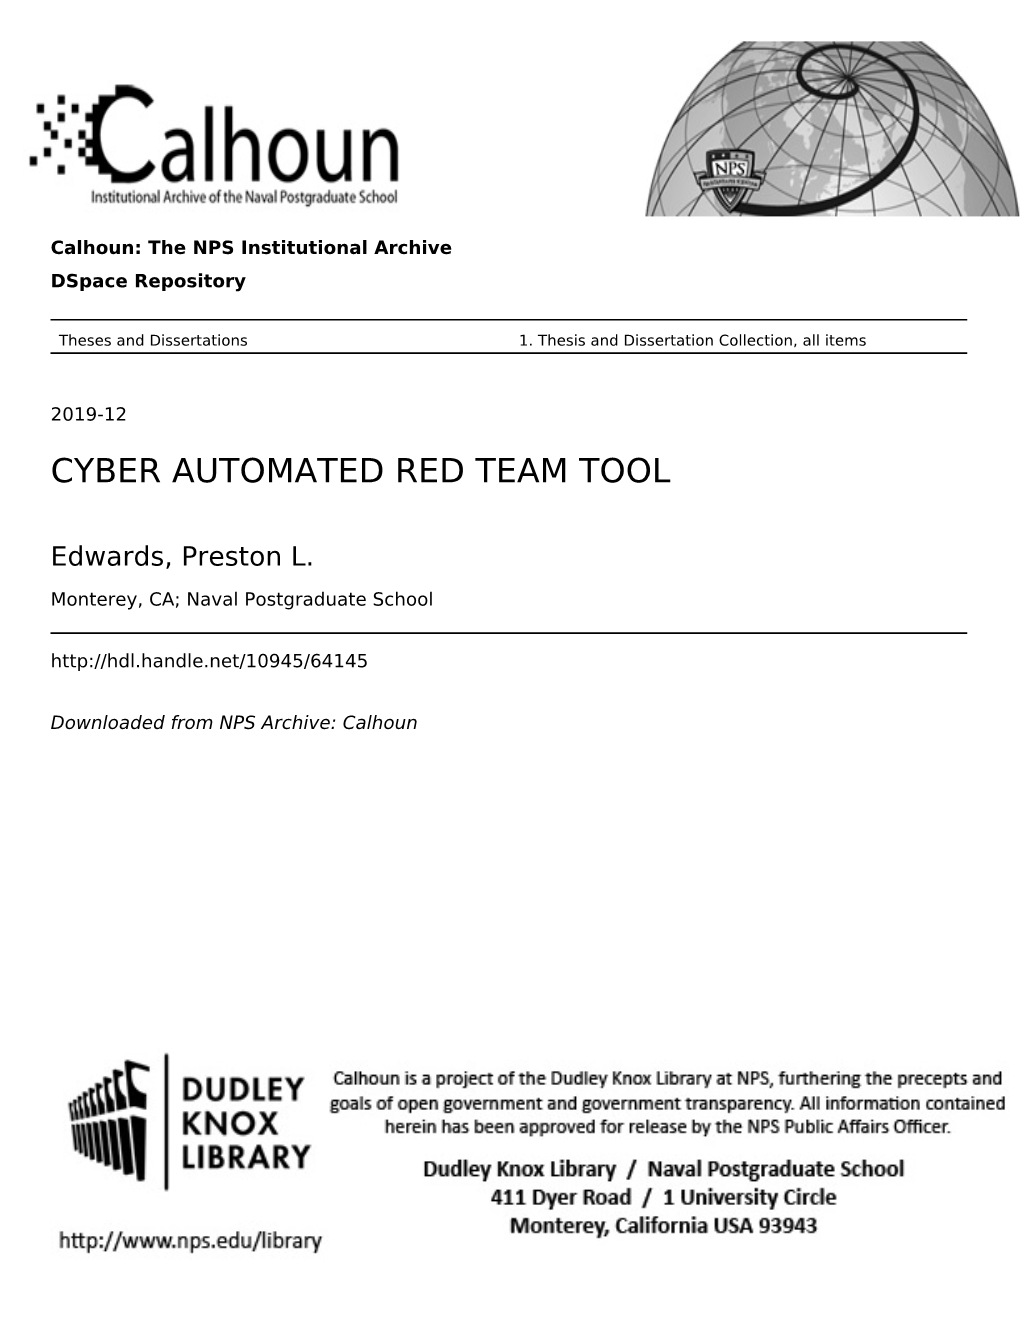 Cyber Automated Red Team Tool